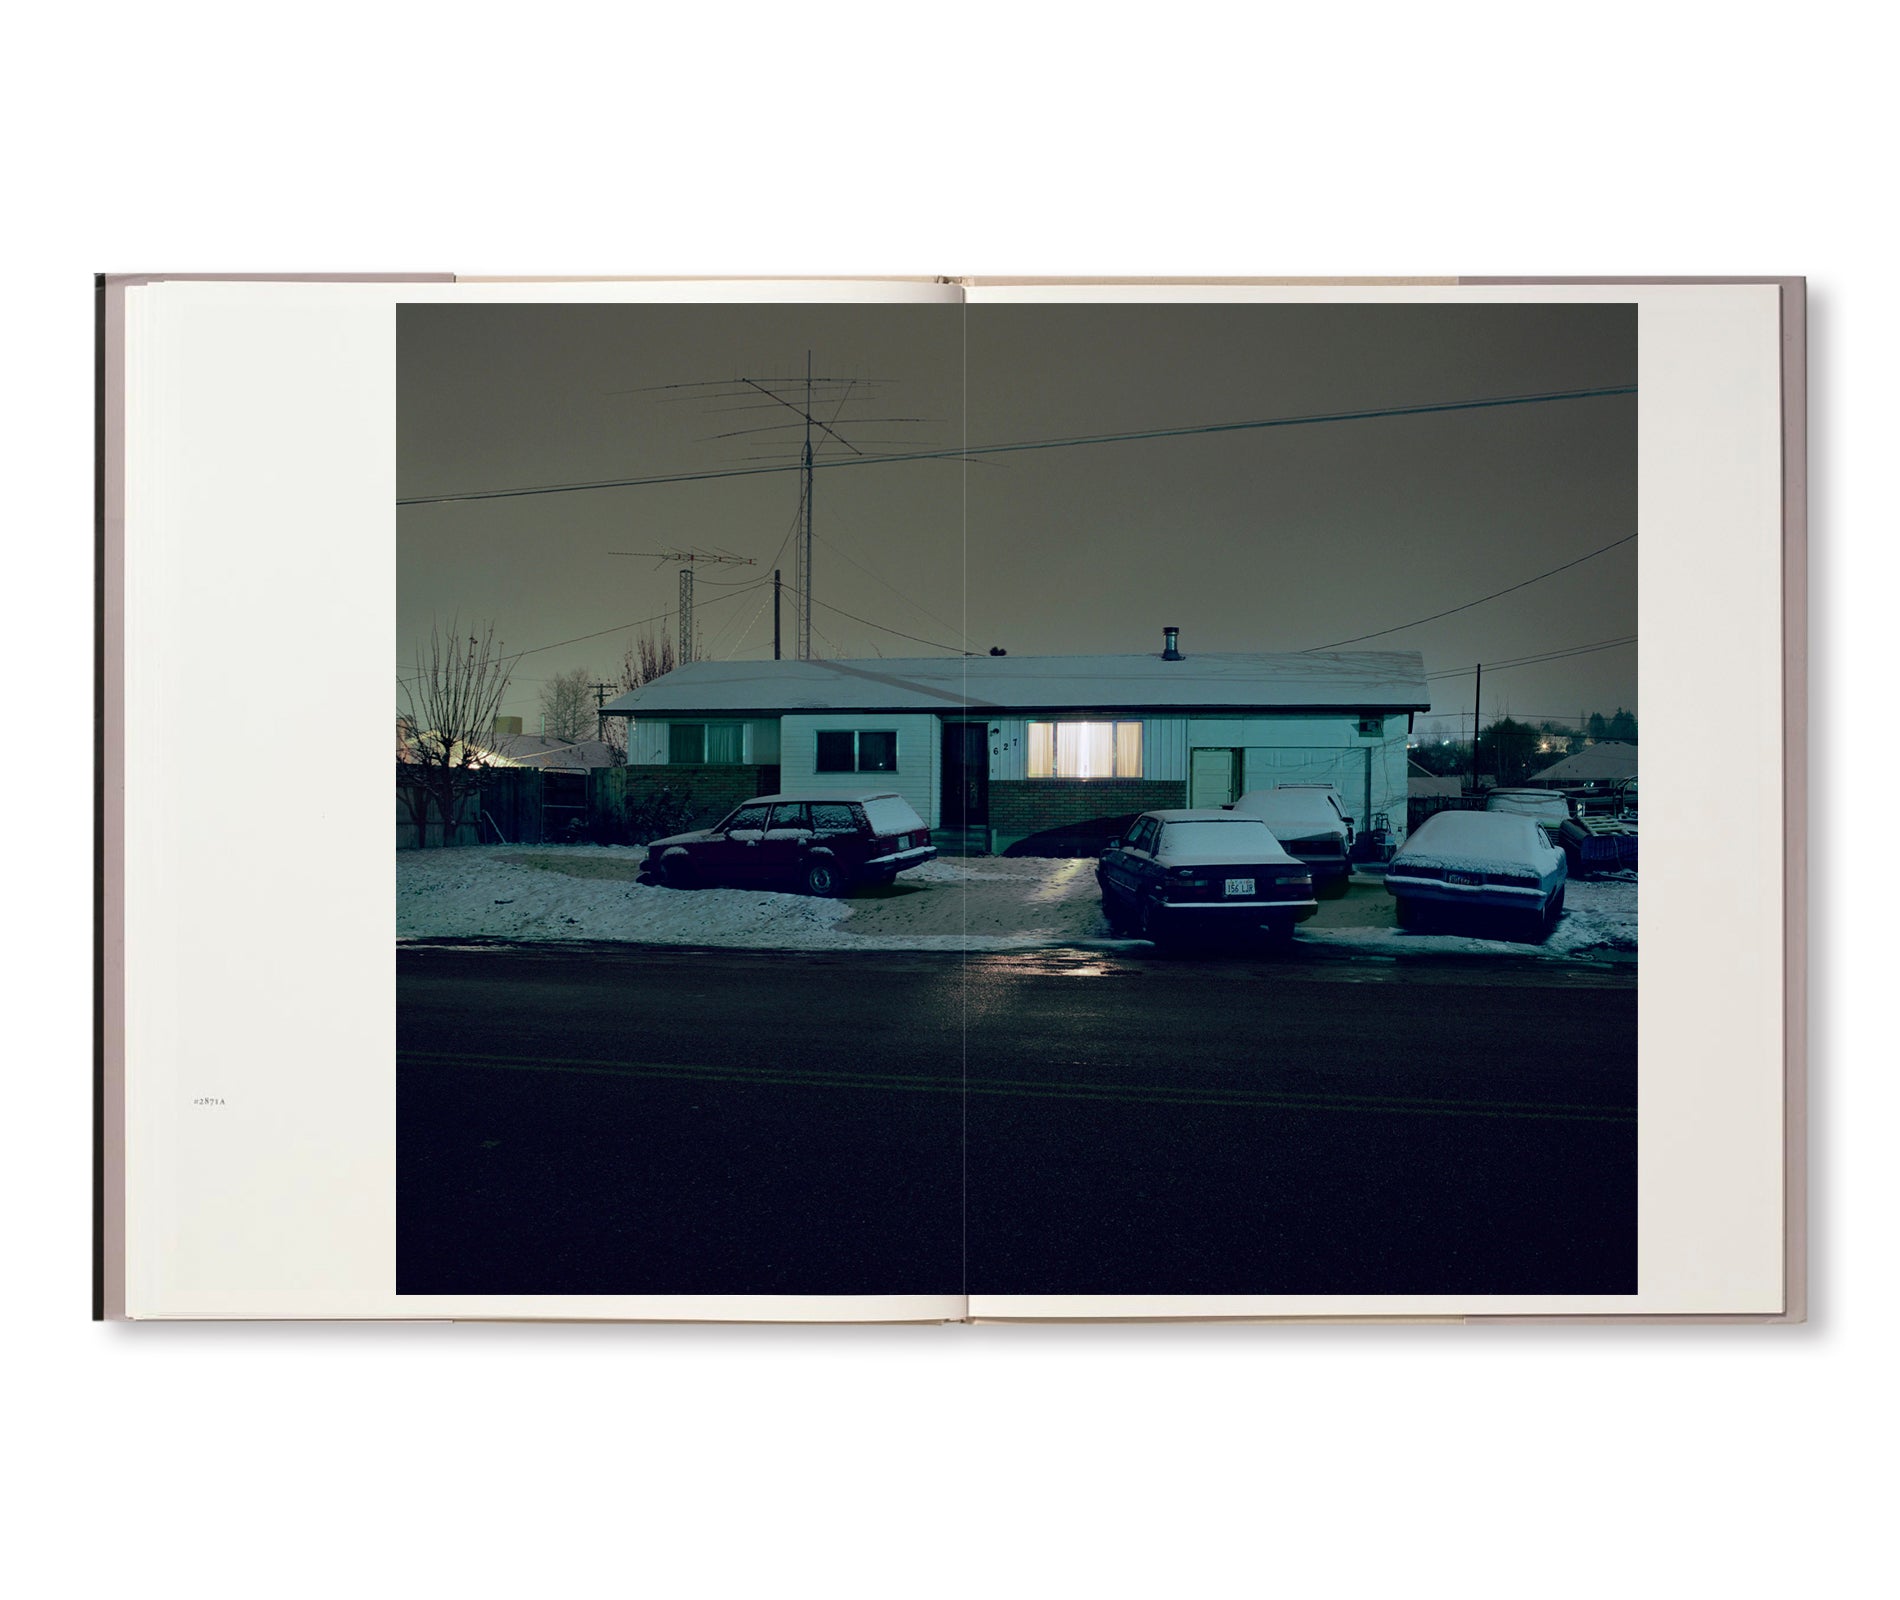 OUTSKIRTS by Todd Hido